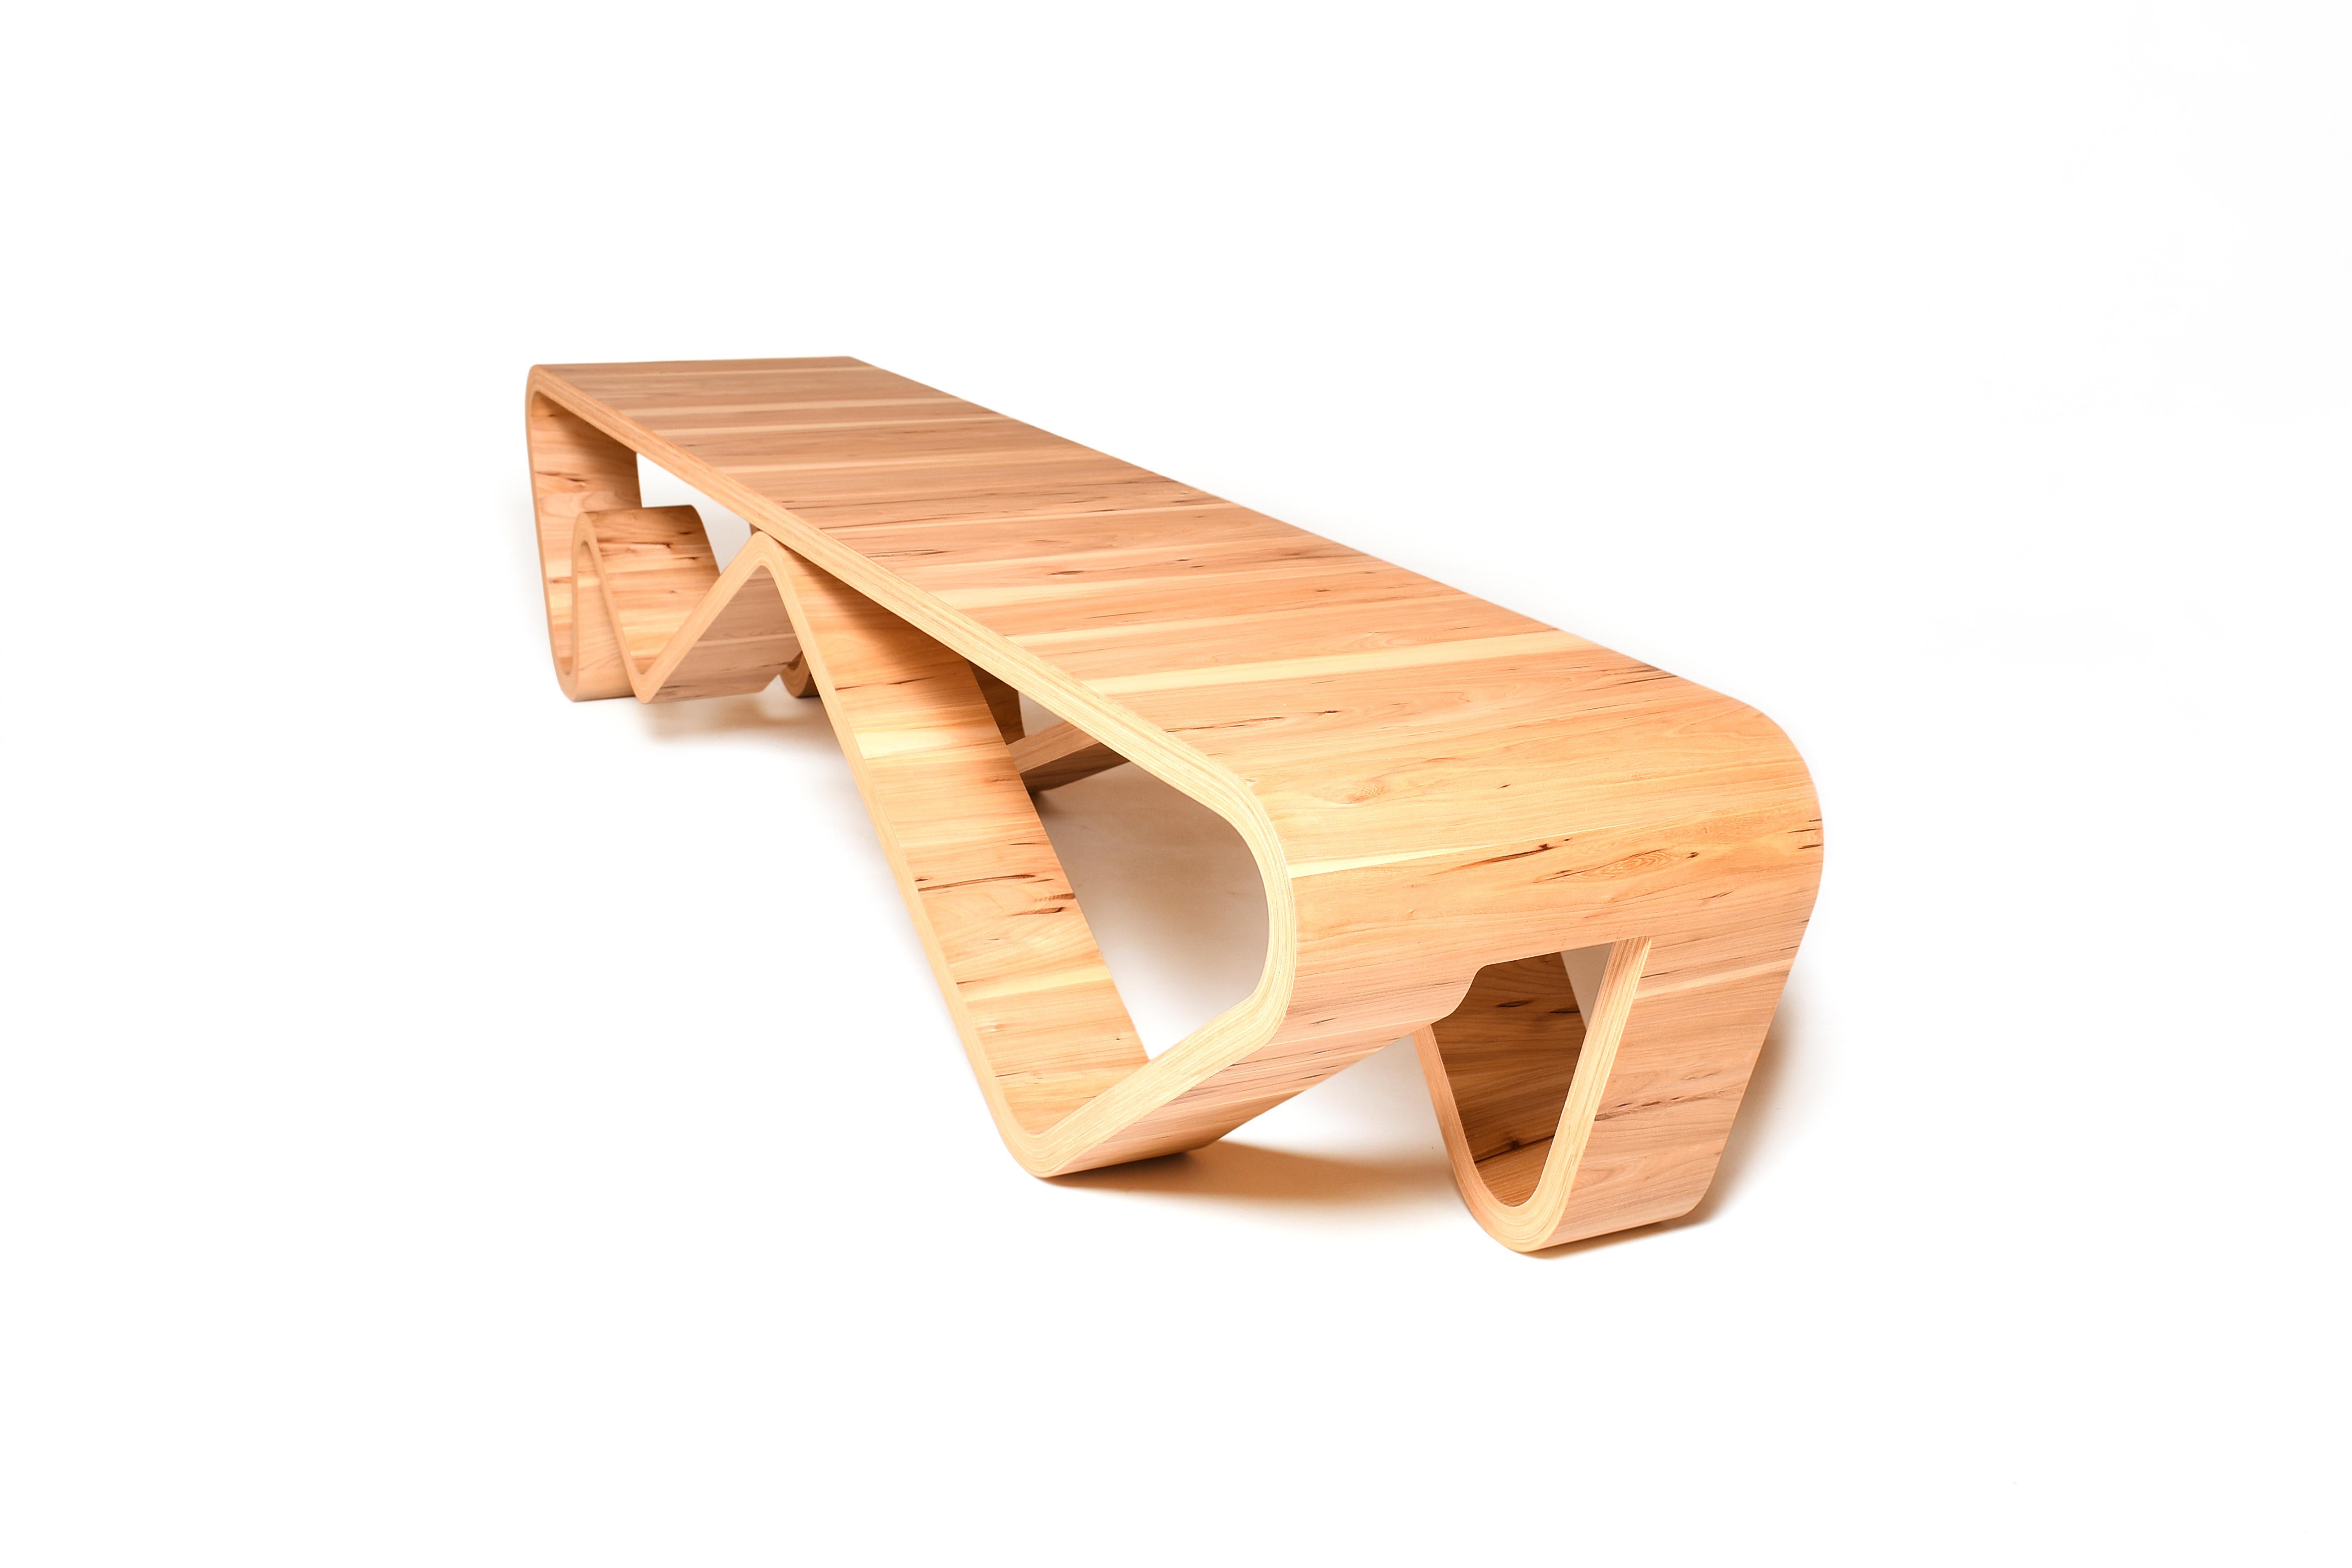 Laminated Apalaches Bench, hand made For Sale